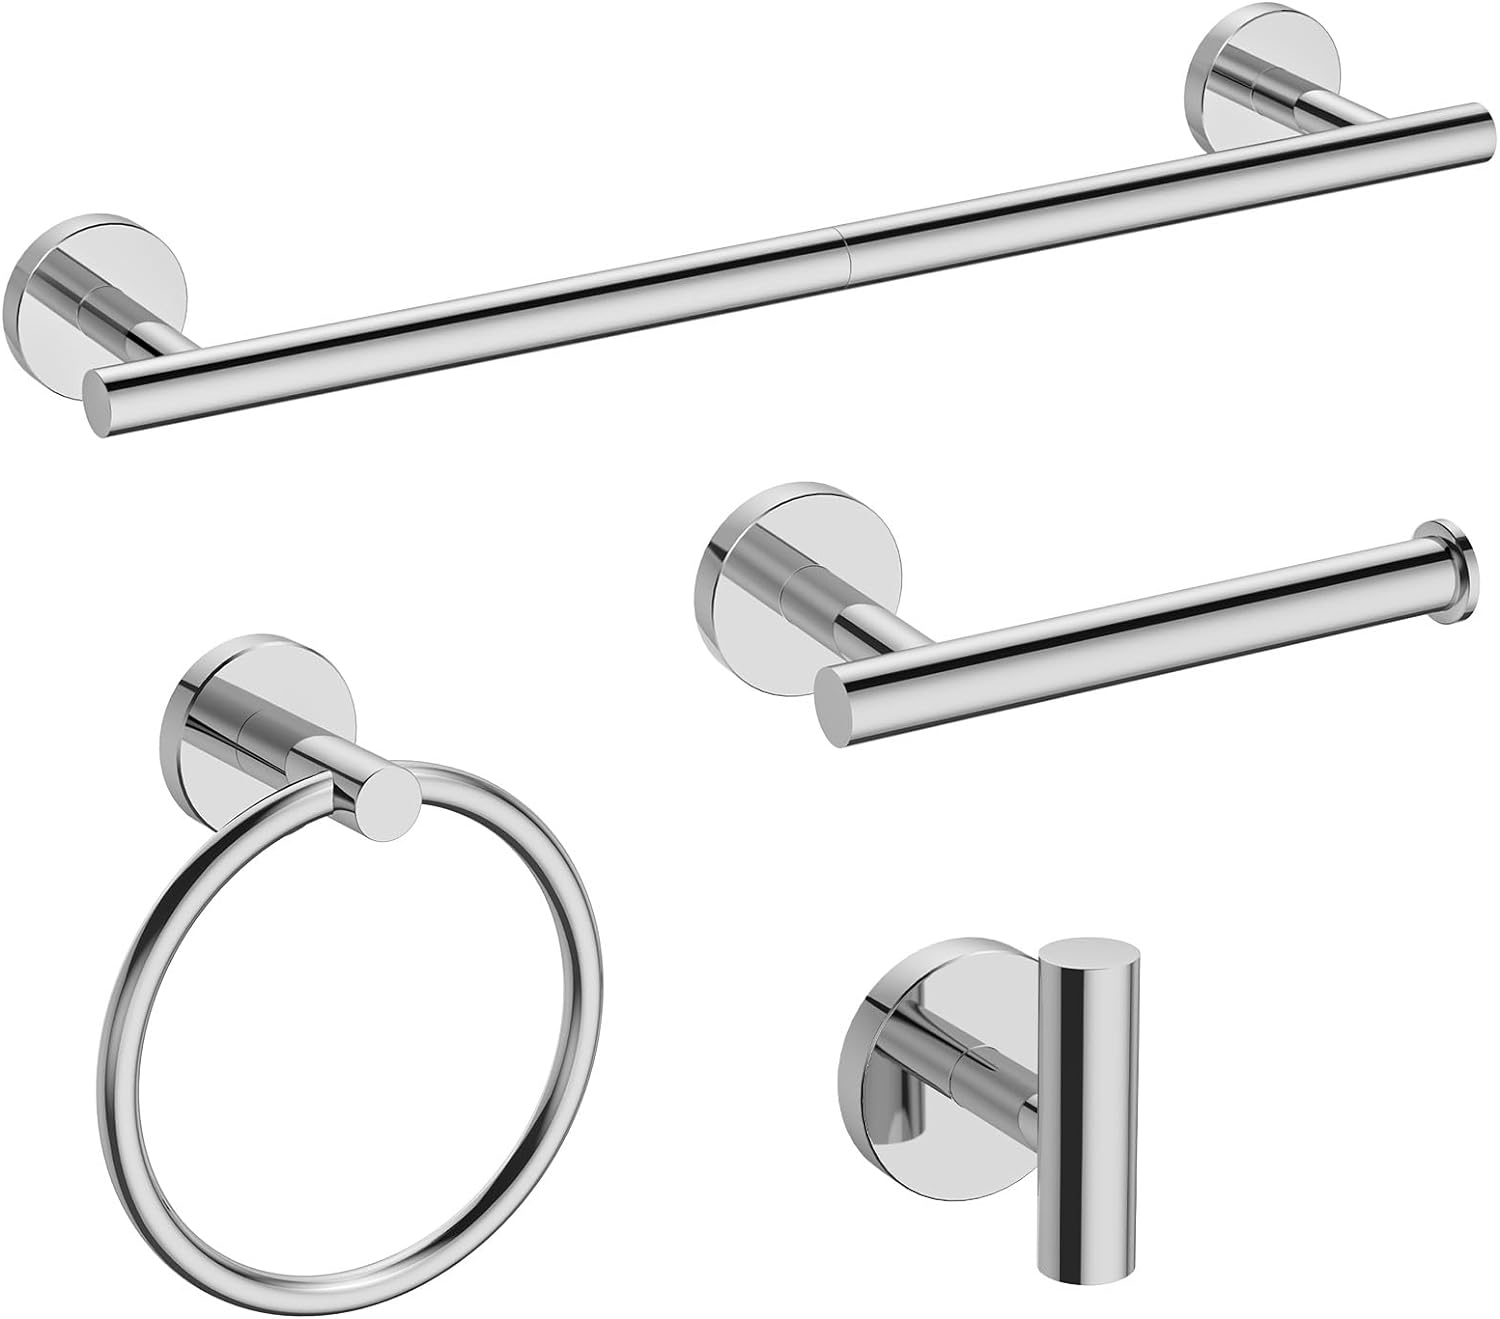 USHOWER Polished Chrome Bathroom Accessories Set, 18-Inch Towel Bar Set Wall Mounted, Durable SUS304 Stainless Steel Bathroom Hardware Set, 4-Piece